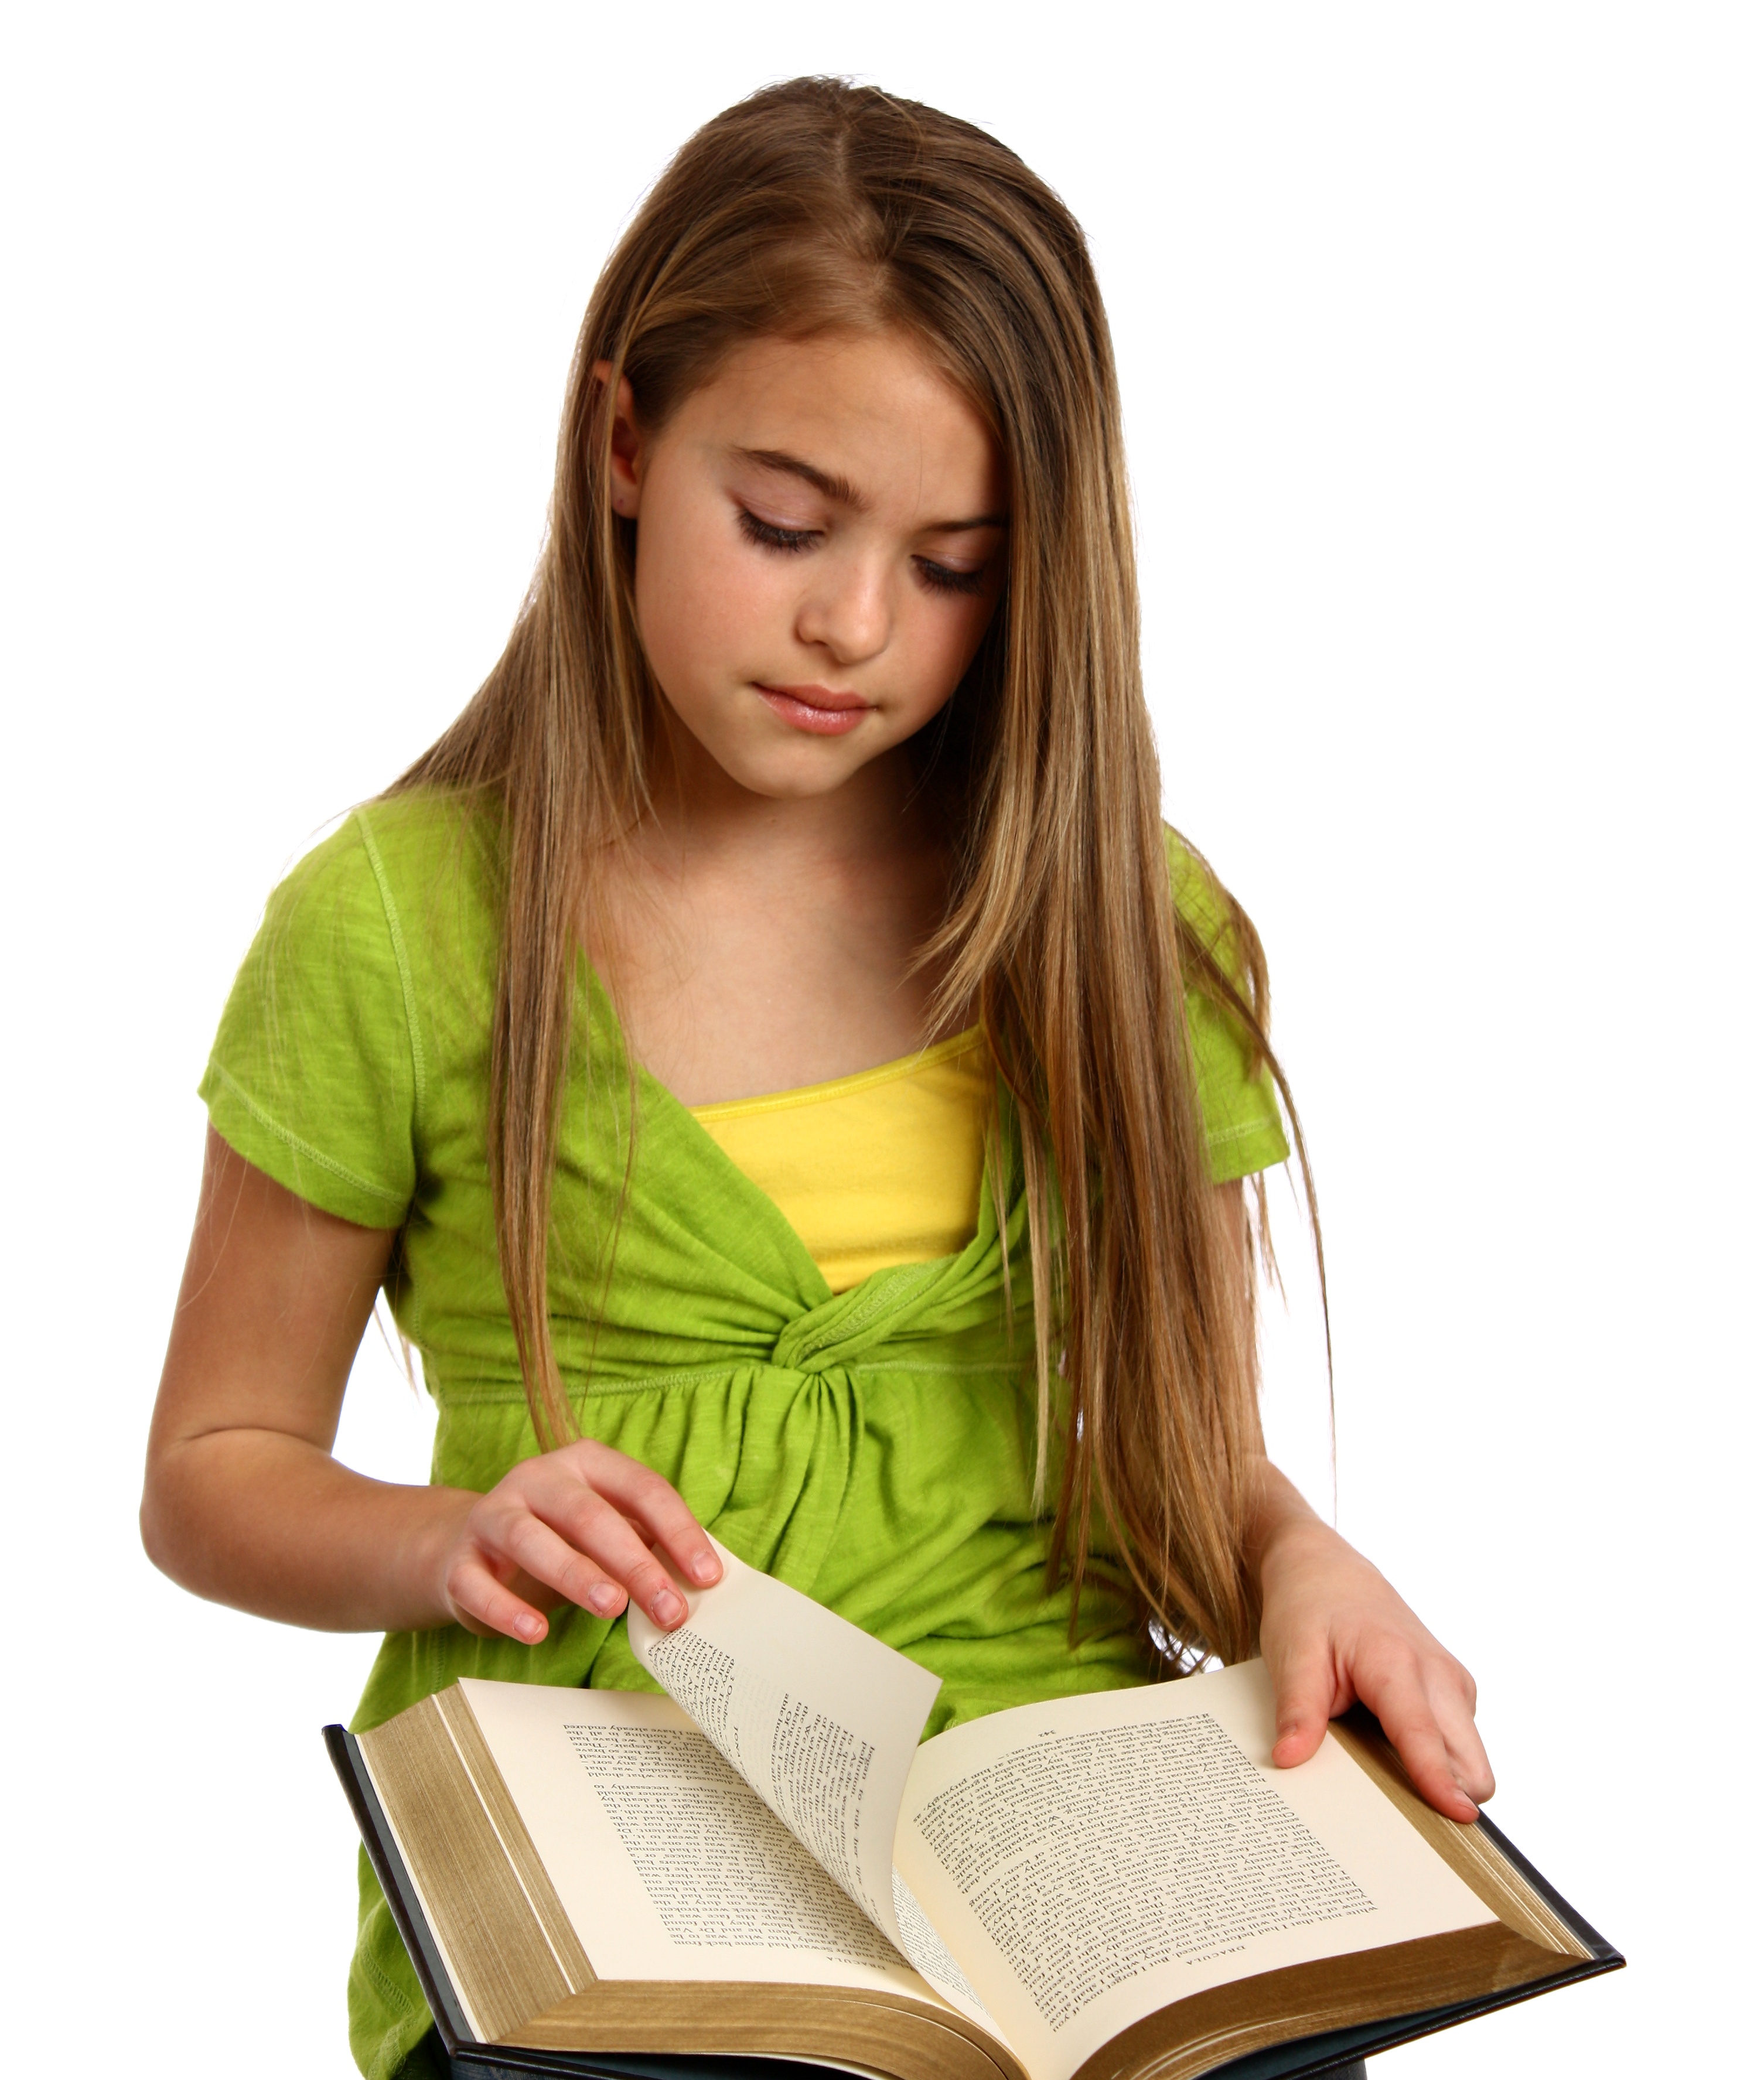 A beautiful young girl reading a book photo